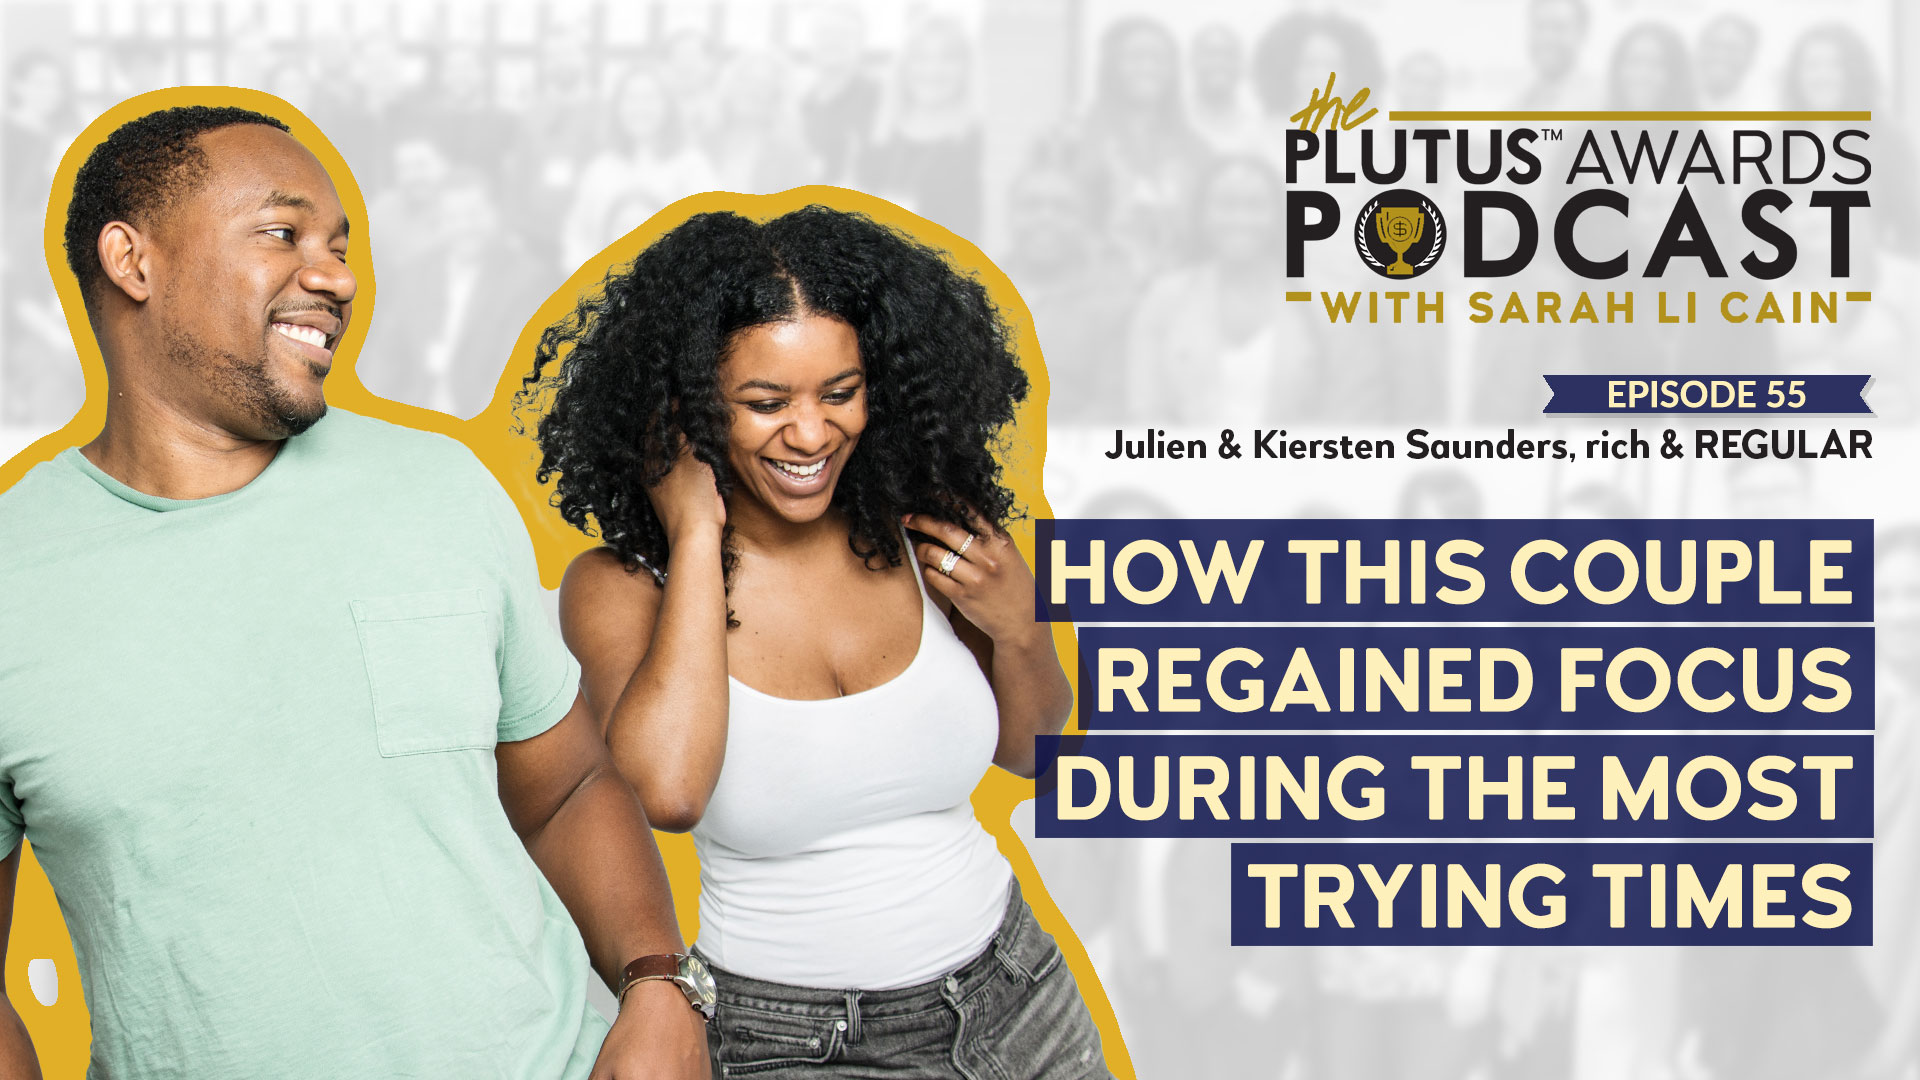 Plutus Awards Podcast - Julien and Kiersten Saunders Featured Image